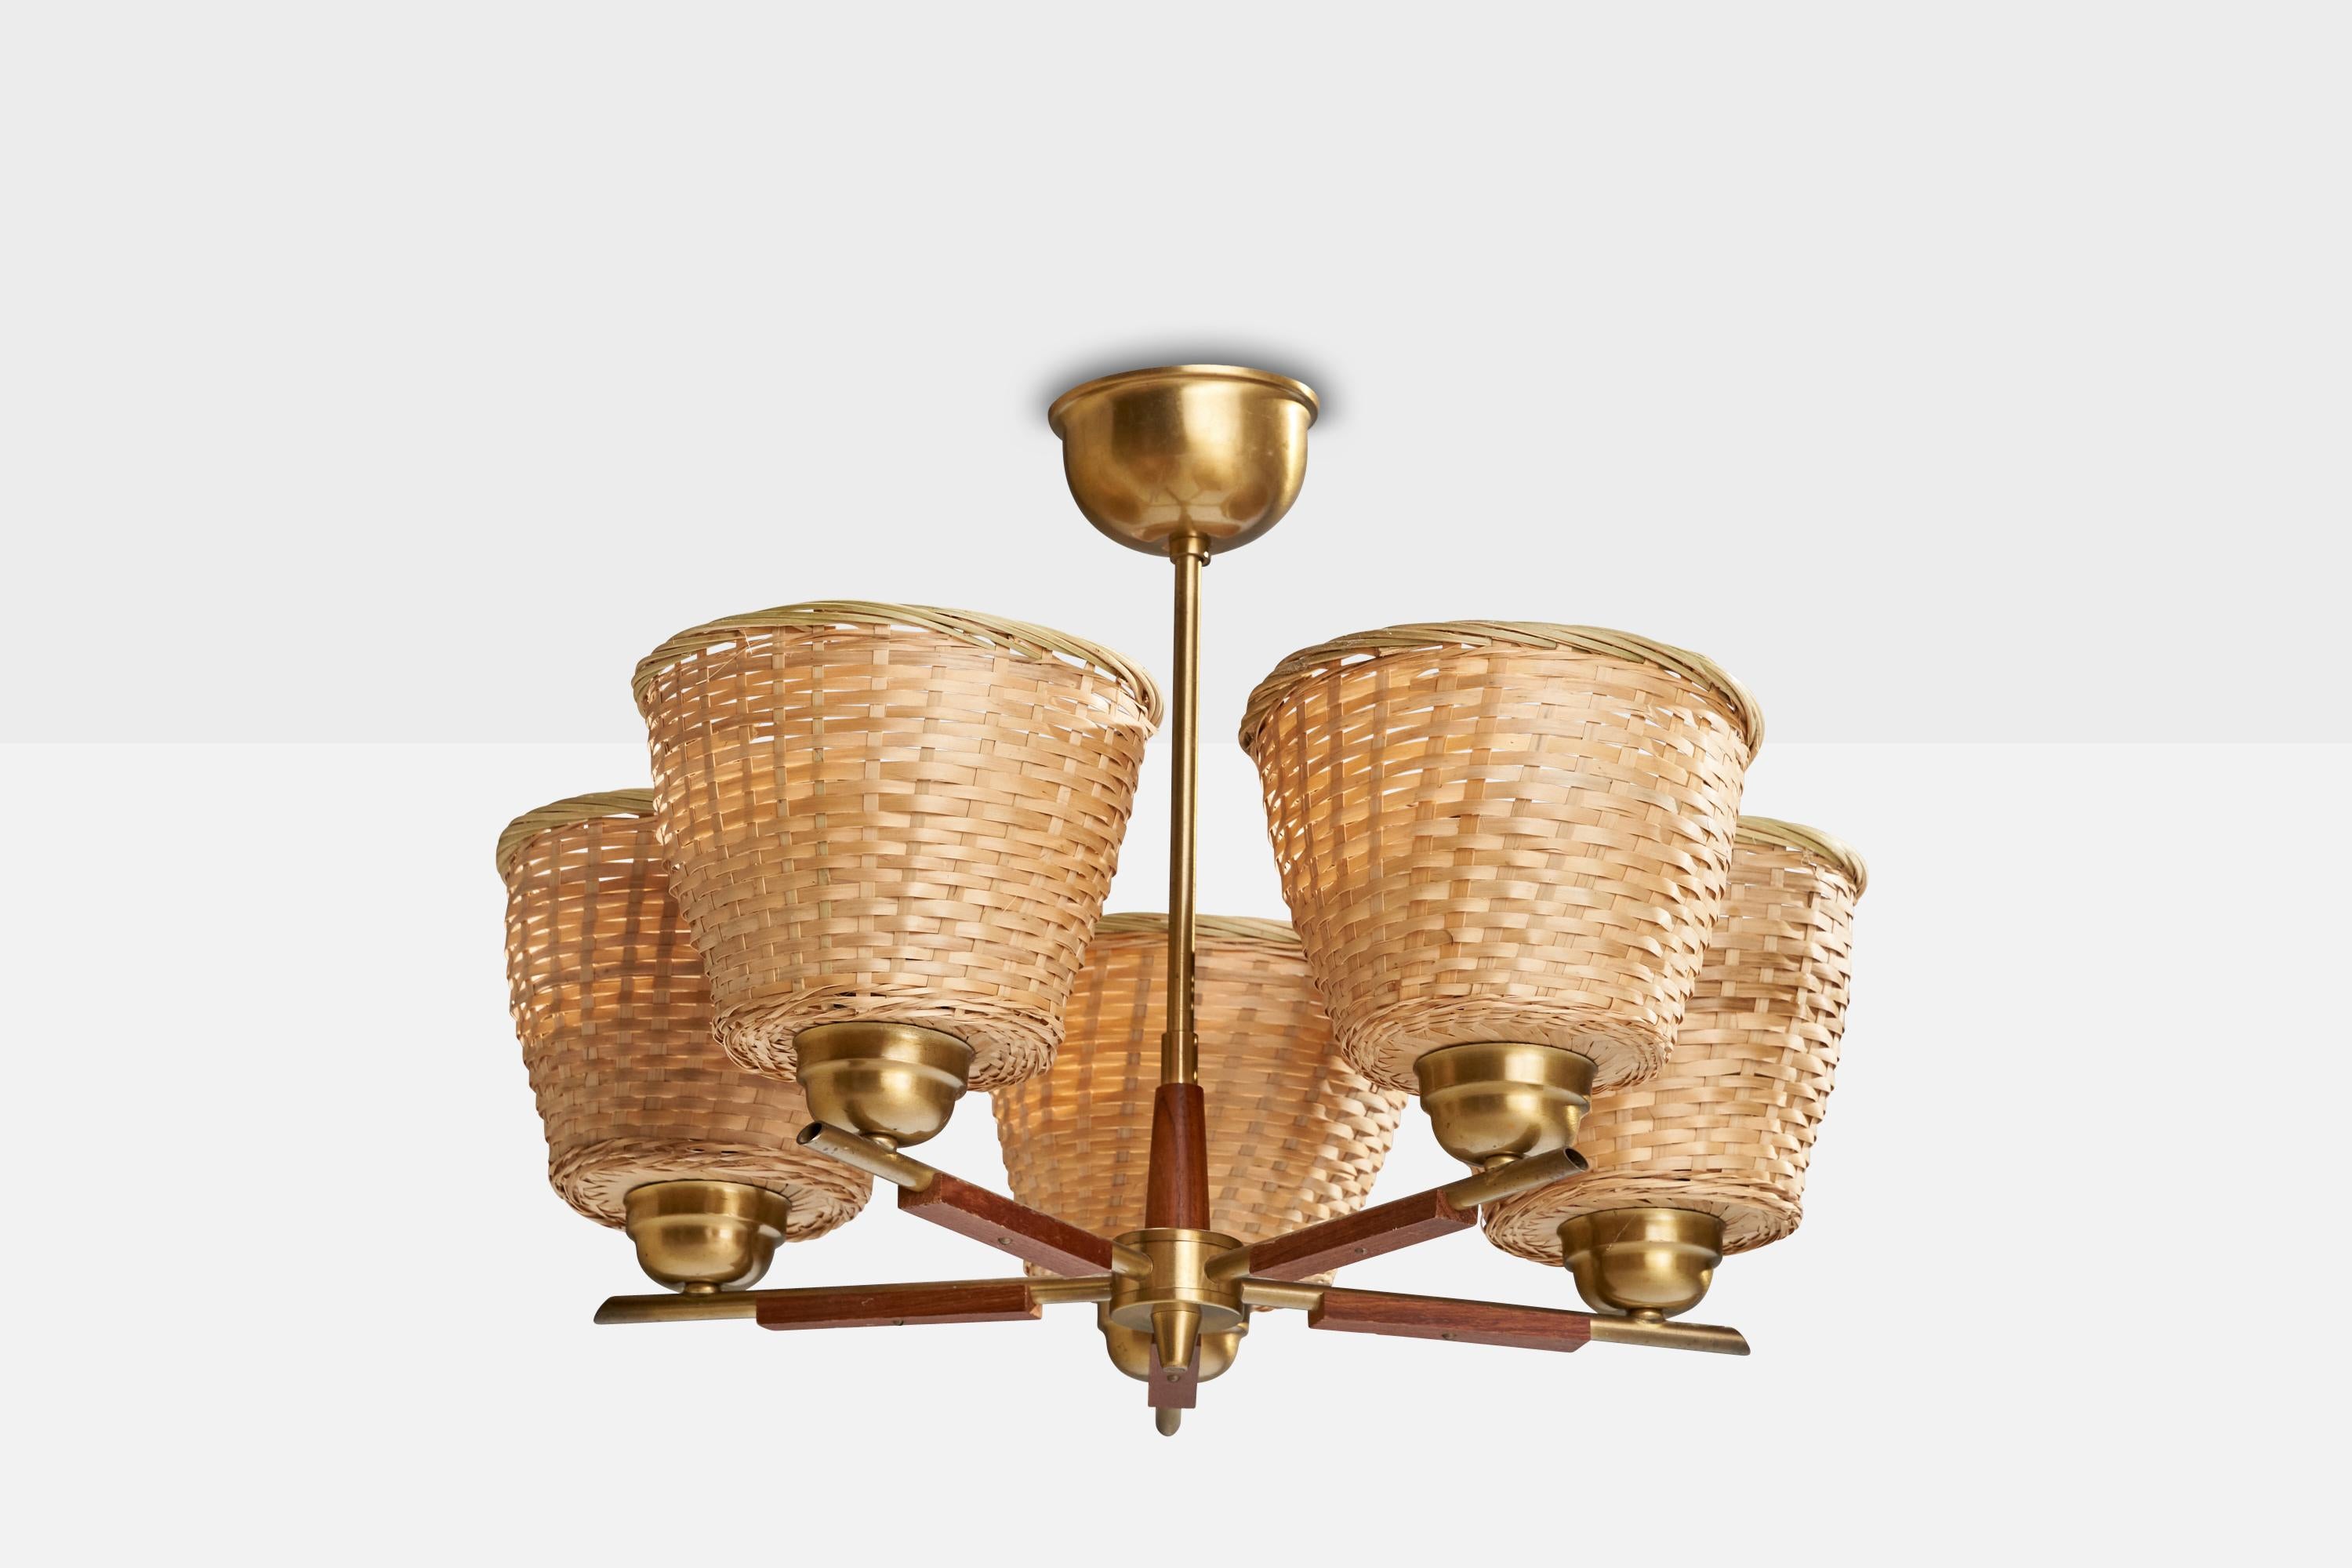 A teak, brass and rattan chandelier designed and produced in Sweden, c. 1950s.

Dimensions of canopy (inches): 2.63” H x 3.5” Diameter
Socket takes standard E-26 bulbs. 1 socket.There is no maximum wattage stated on the fixture. All lighting will be